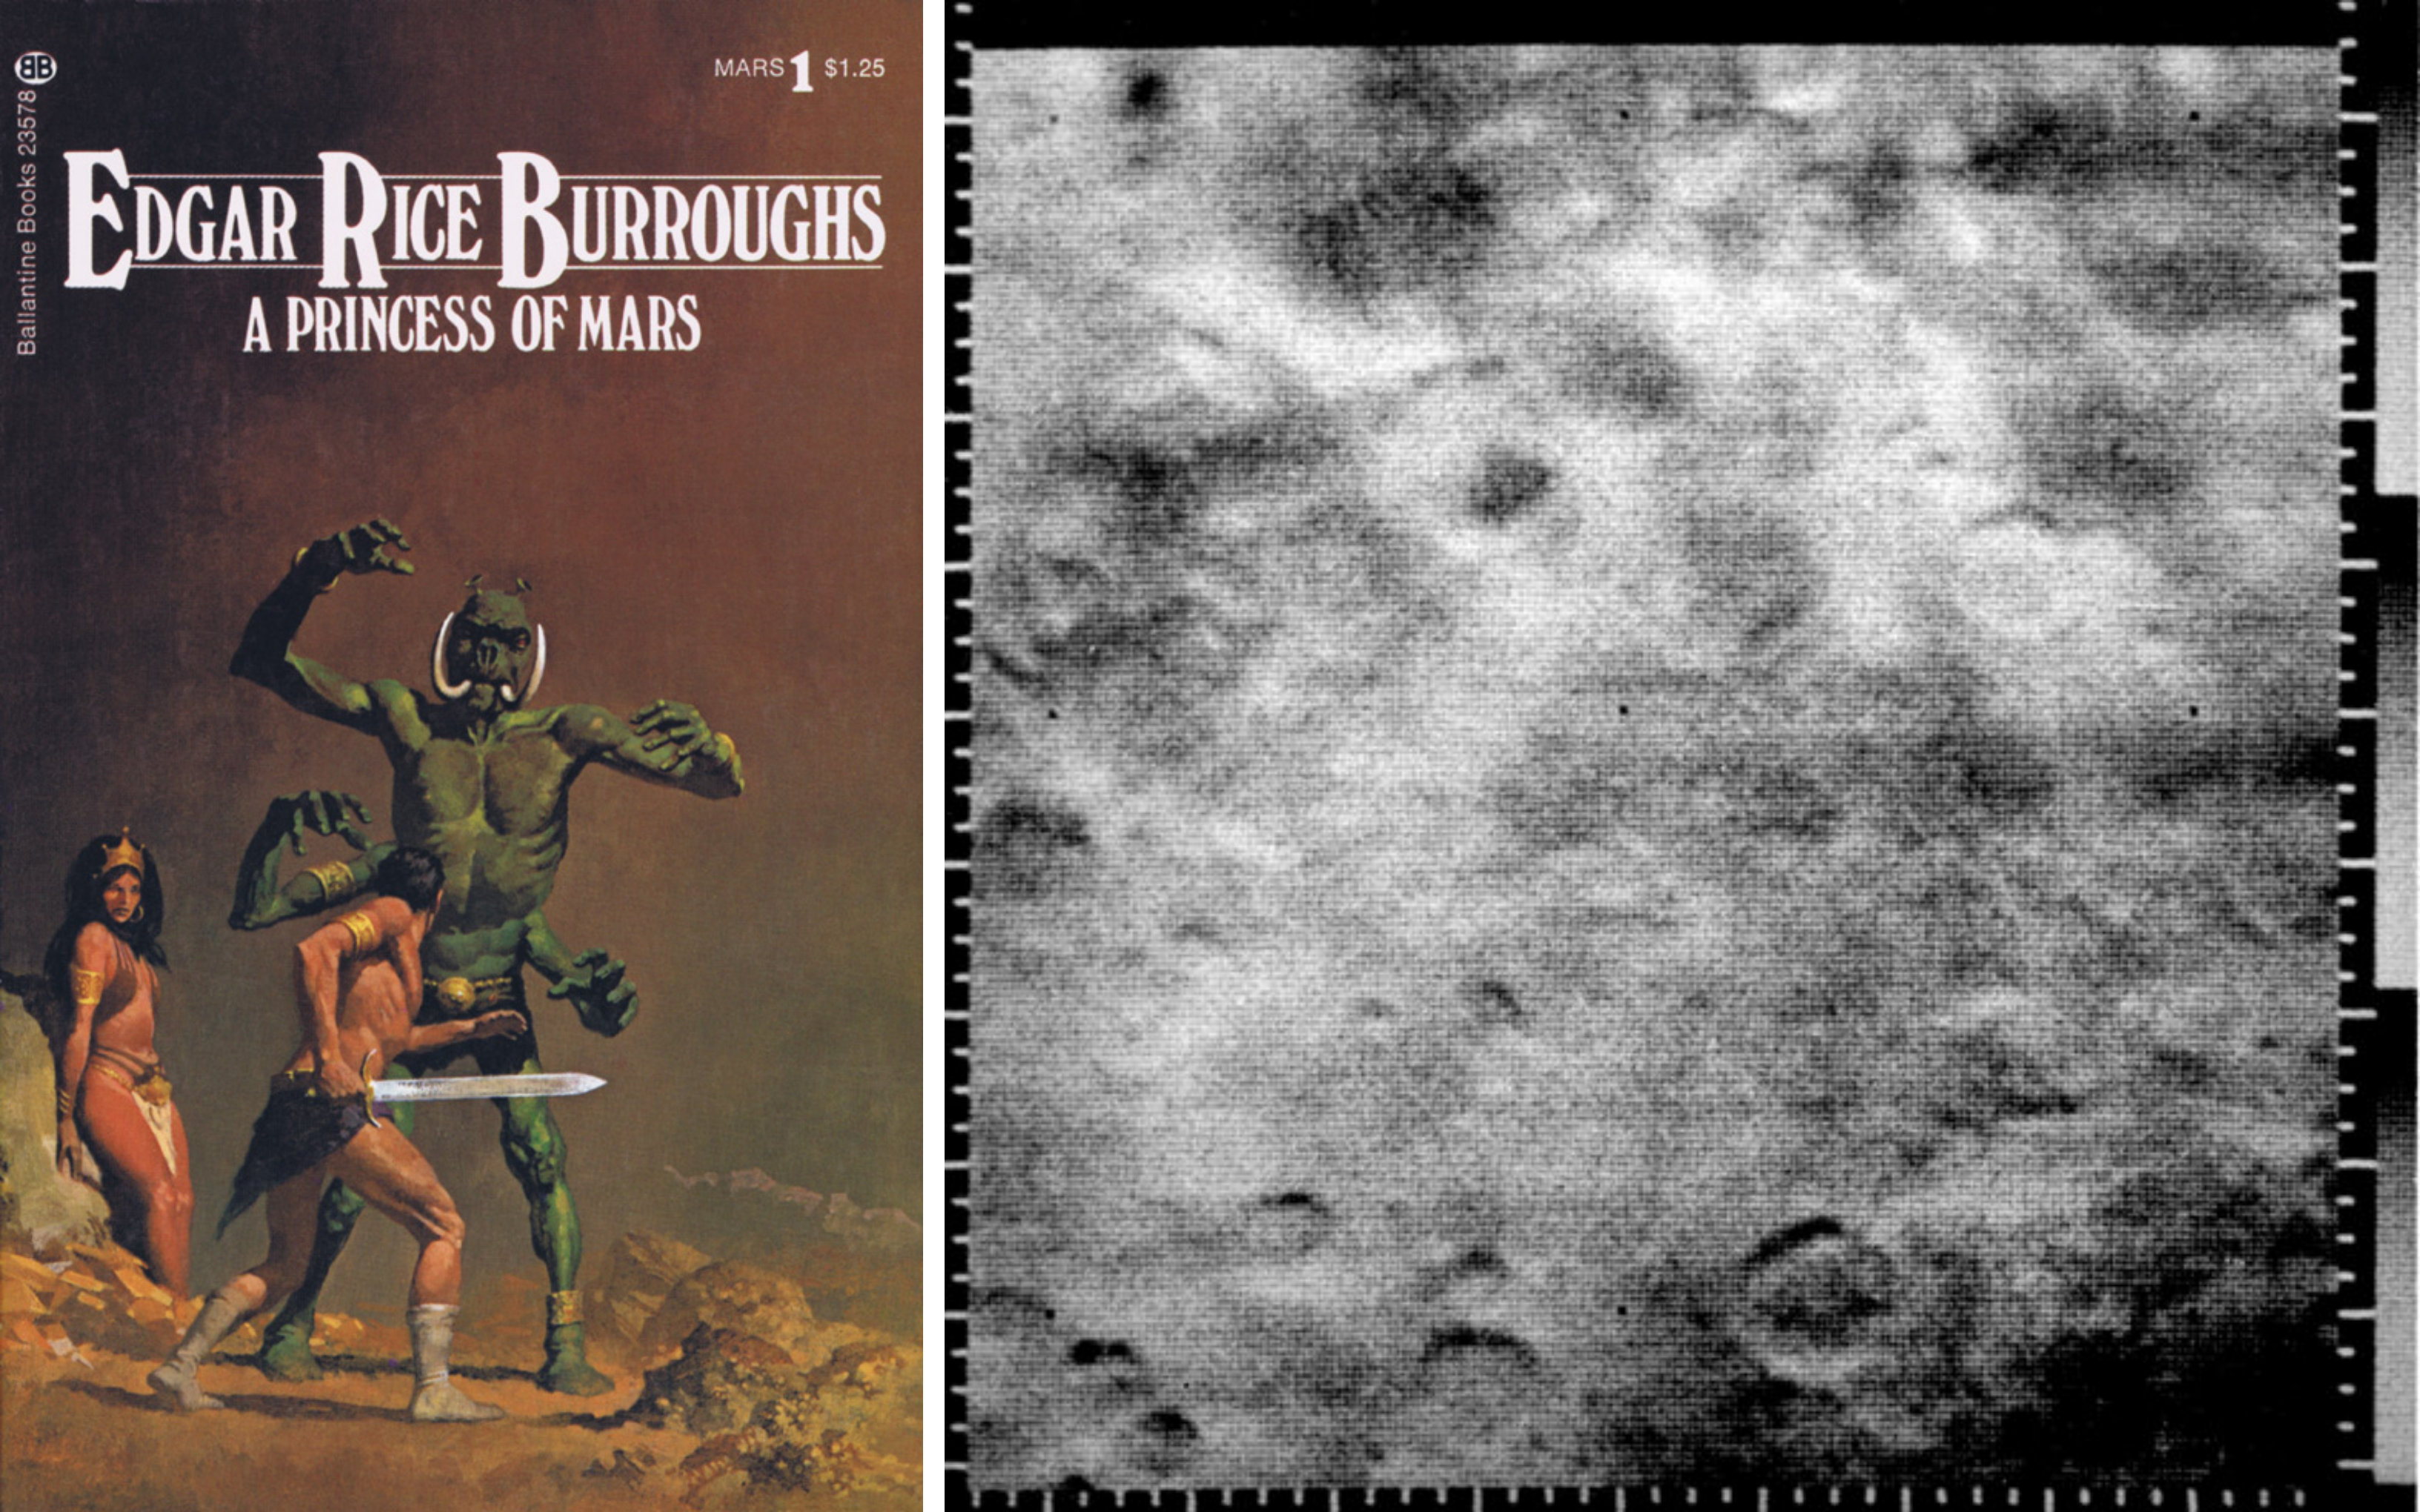 On the left, imagined Martians from Borroughs' A Princess of Mars. On the right, a Mariner 4 image of Mars' surface craters.